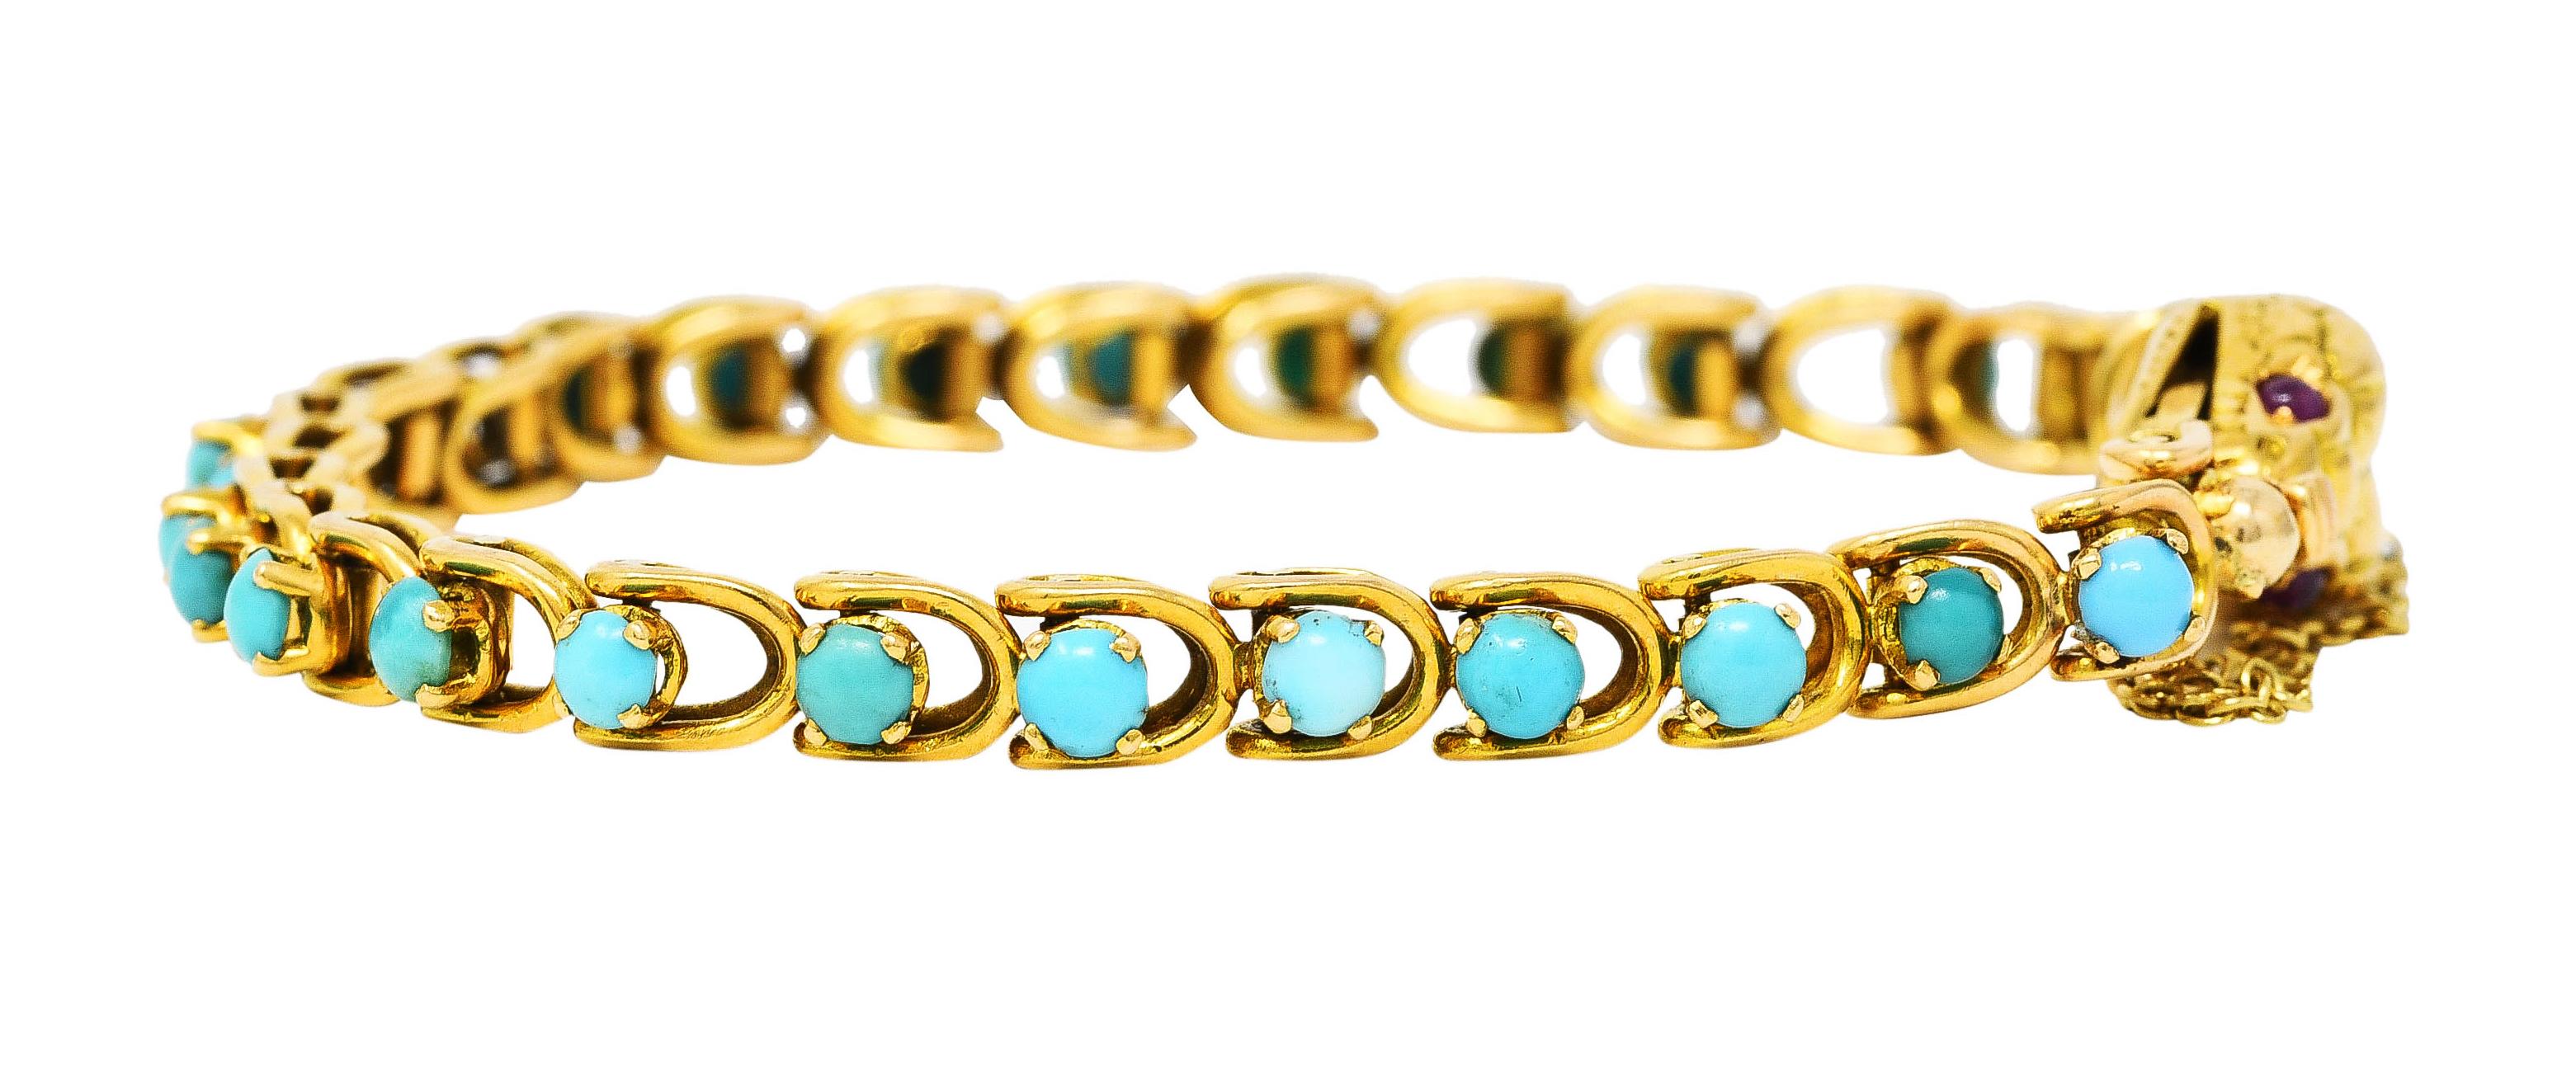 Bracelet is comprised of articulated and dimensionally folded curb links. Each set with a 3.5 mm round turquoise cabochon. Opaque and ranging from strongly bluish green to pastel blue in color. Featuring a stylized snake head with deeply engraved